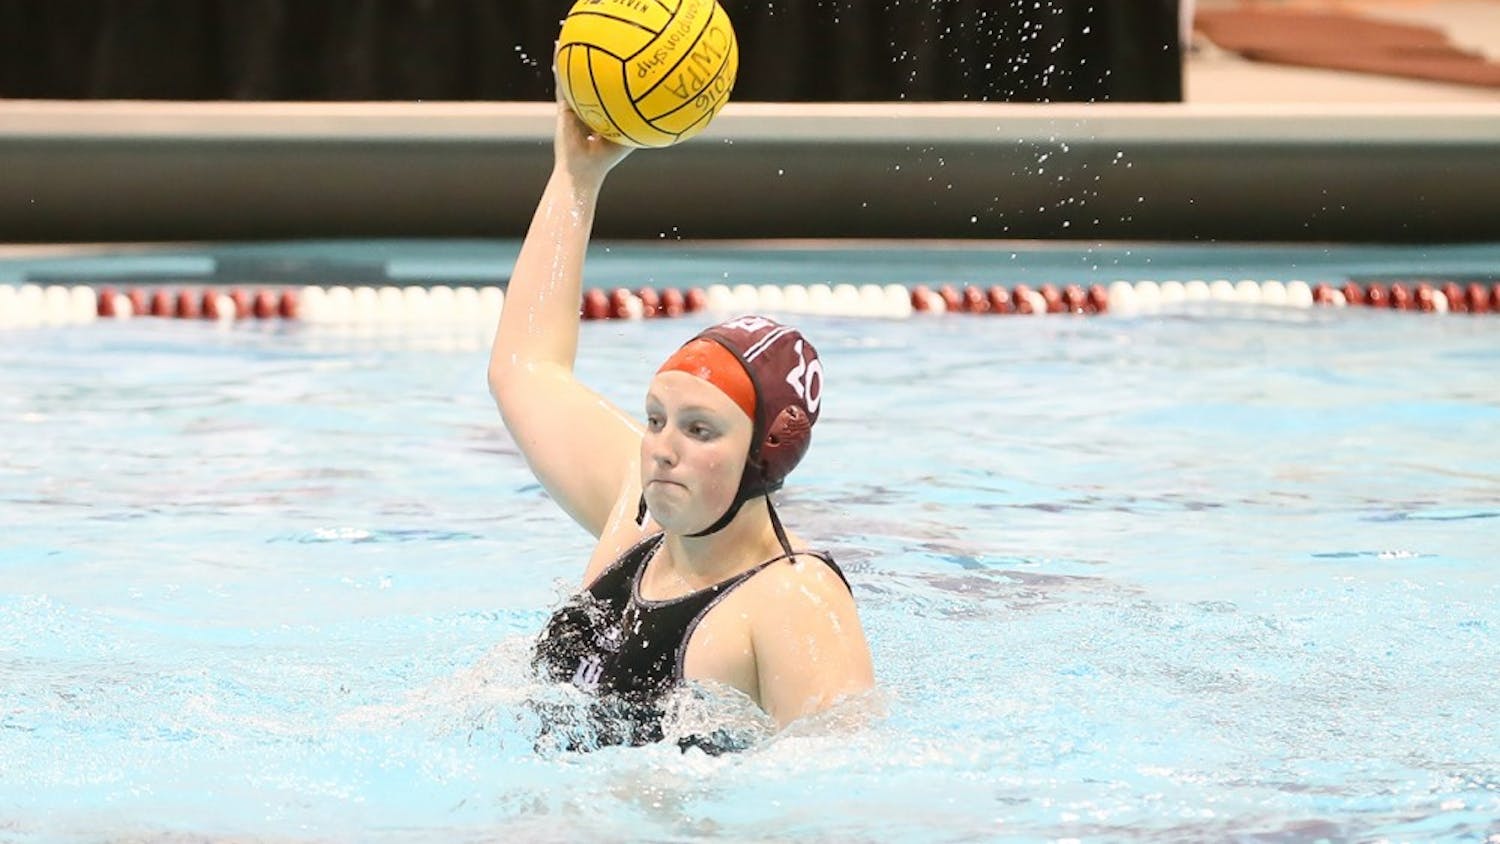 Then-junior Bronwyn Smith handles the ball in last year's CWPA Championship game against Michigan on April 30, 2016. Smith is now IU's lone senior and scored a hat trick on senior night on Friday.